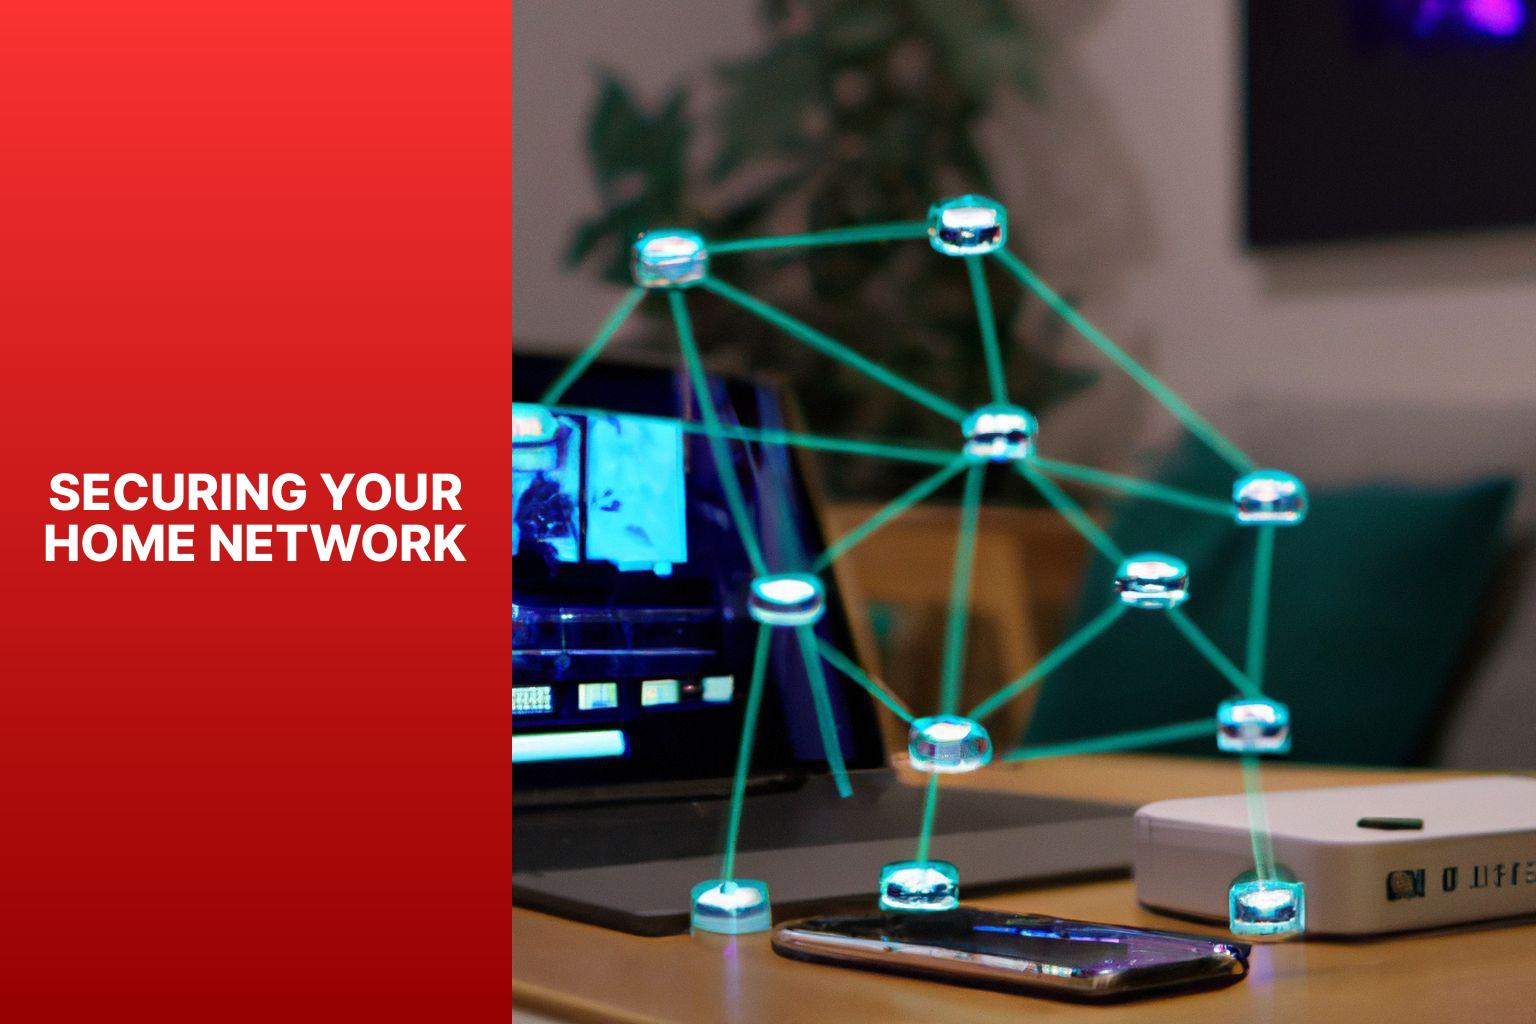 Securing Your Home Network - Tutorial: How to Set up a Home Network 